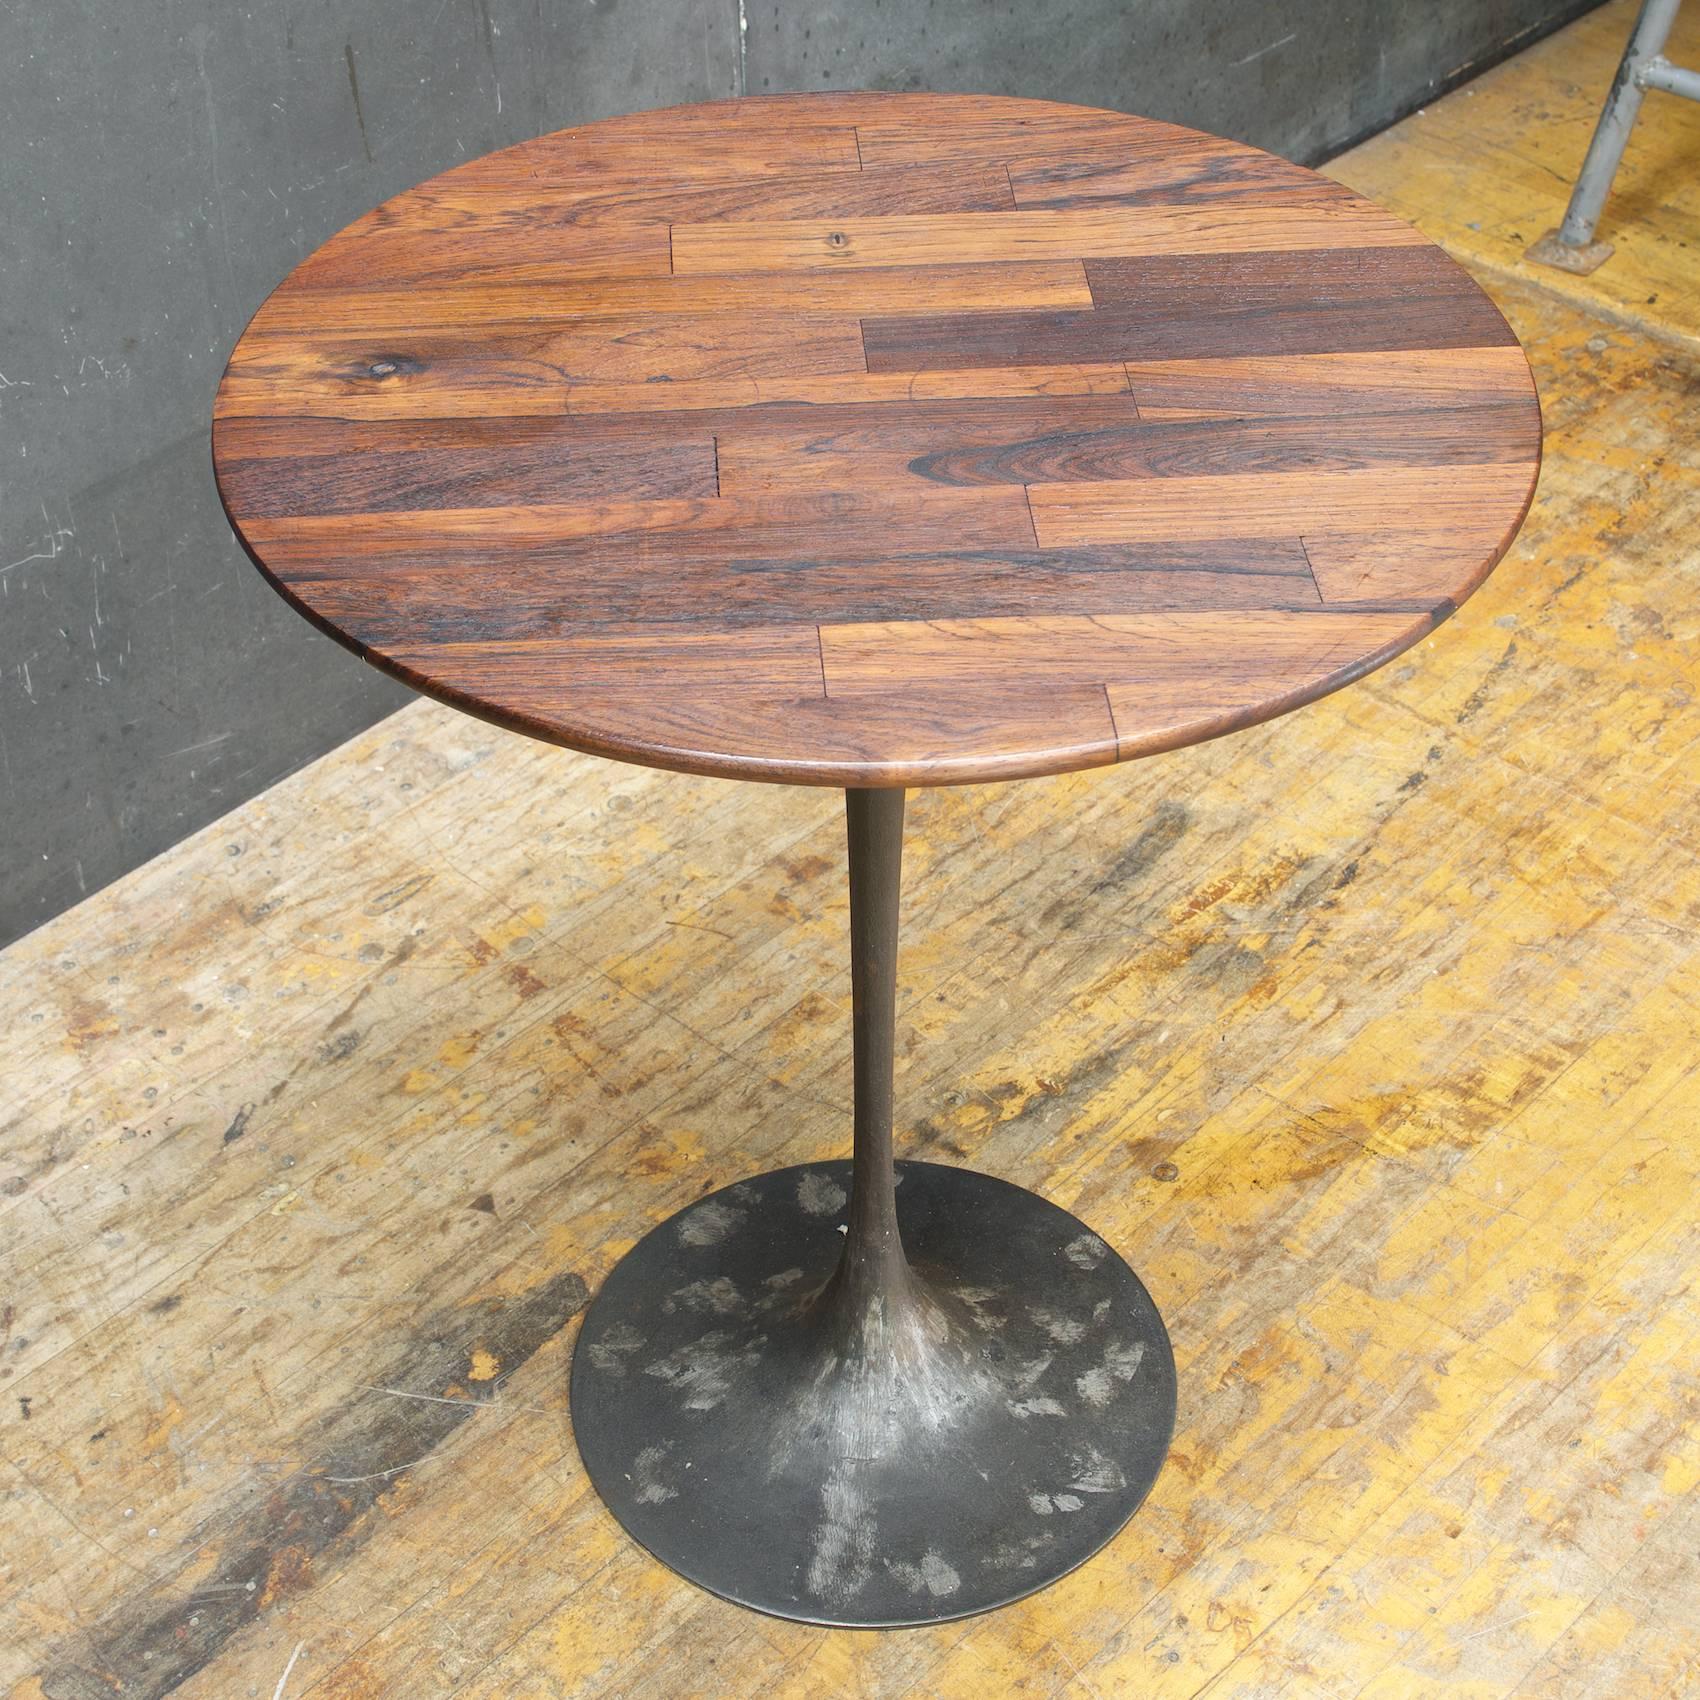 Very Unique Tulip Table, Odd Configuration; with a revealed cast iron base, showing the chasing spots, and staved rosewood tabletop. Extremely heavy.